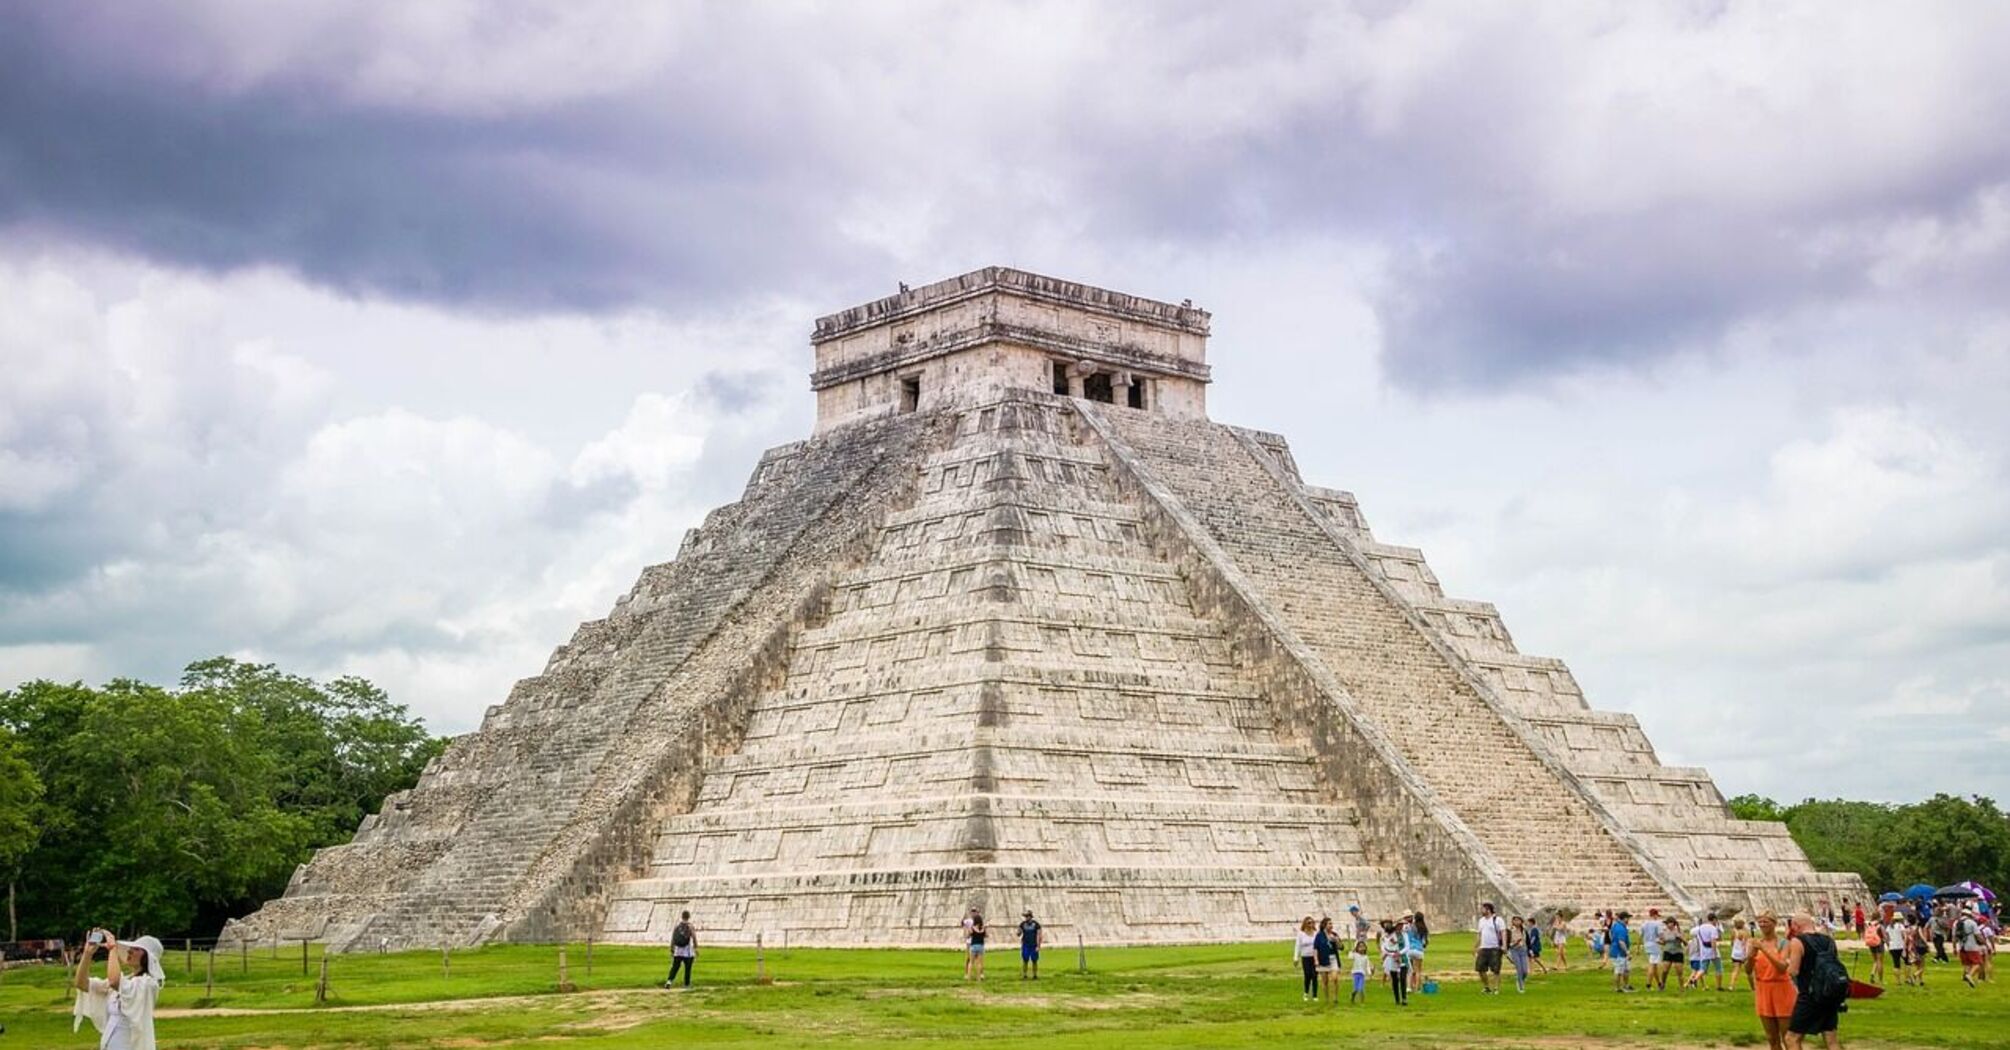 Mayan ruins in Mexico are visited by millions of tourists